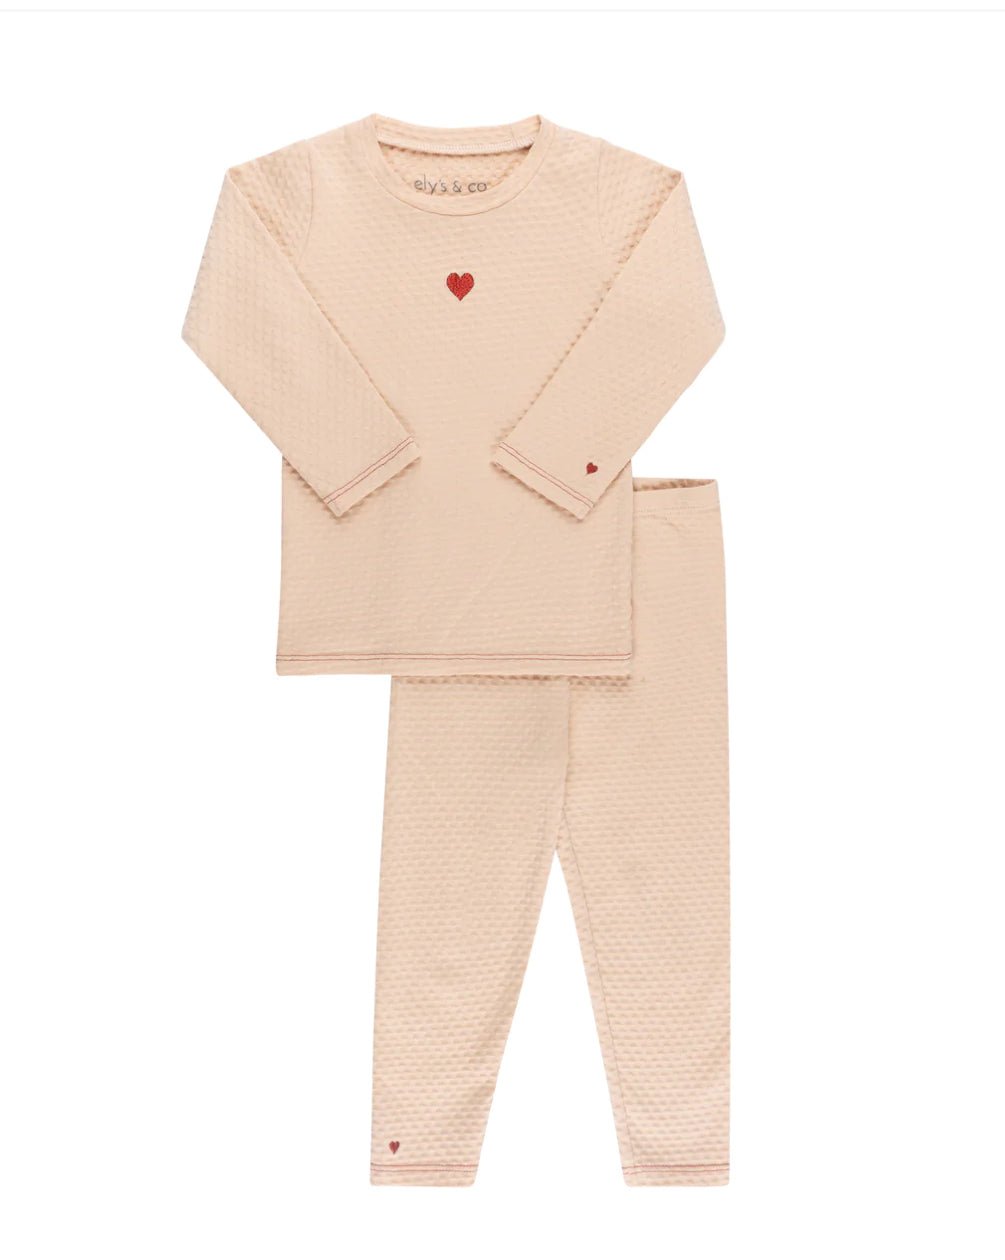 Elys & Co. Cotton- Embroidered Heart and Star Collection Lounge Set - Blissful Bundlz